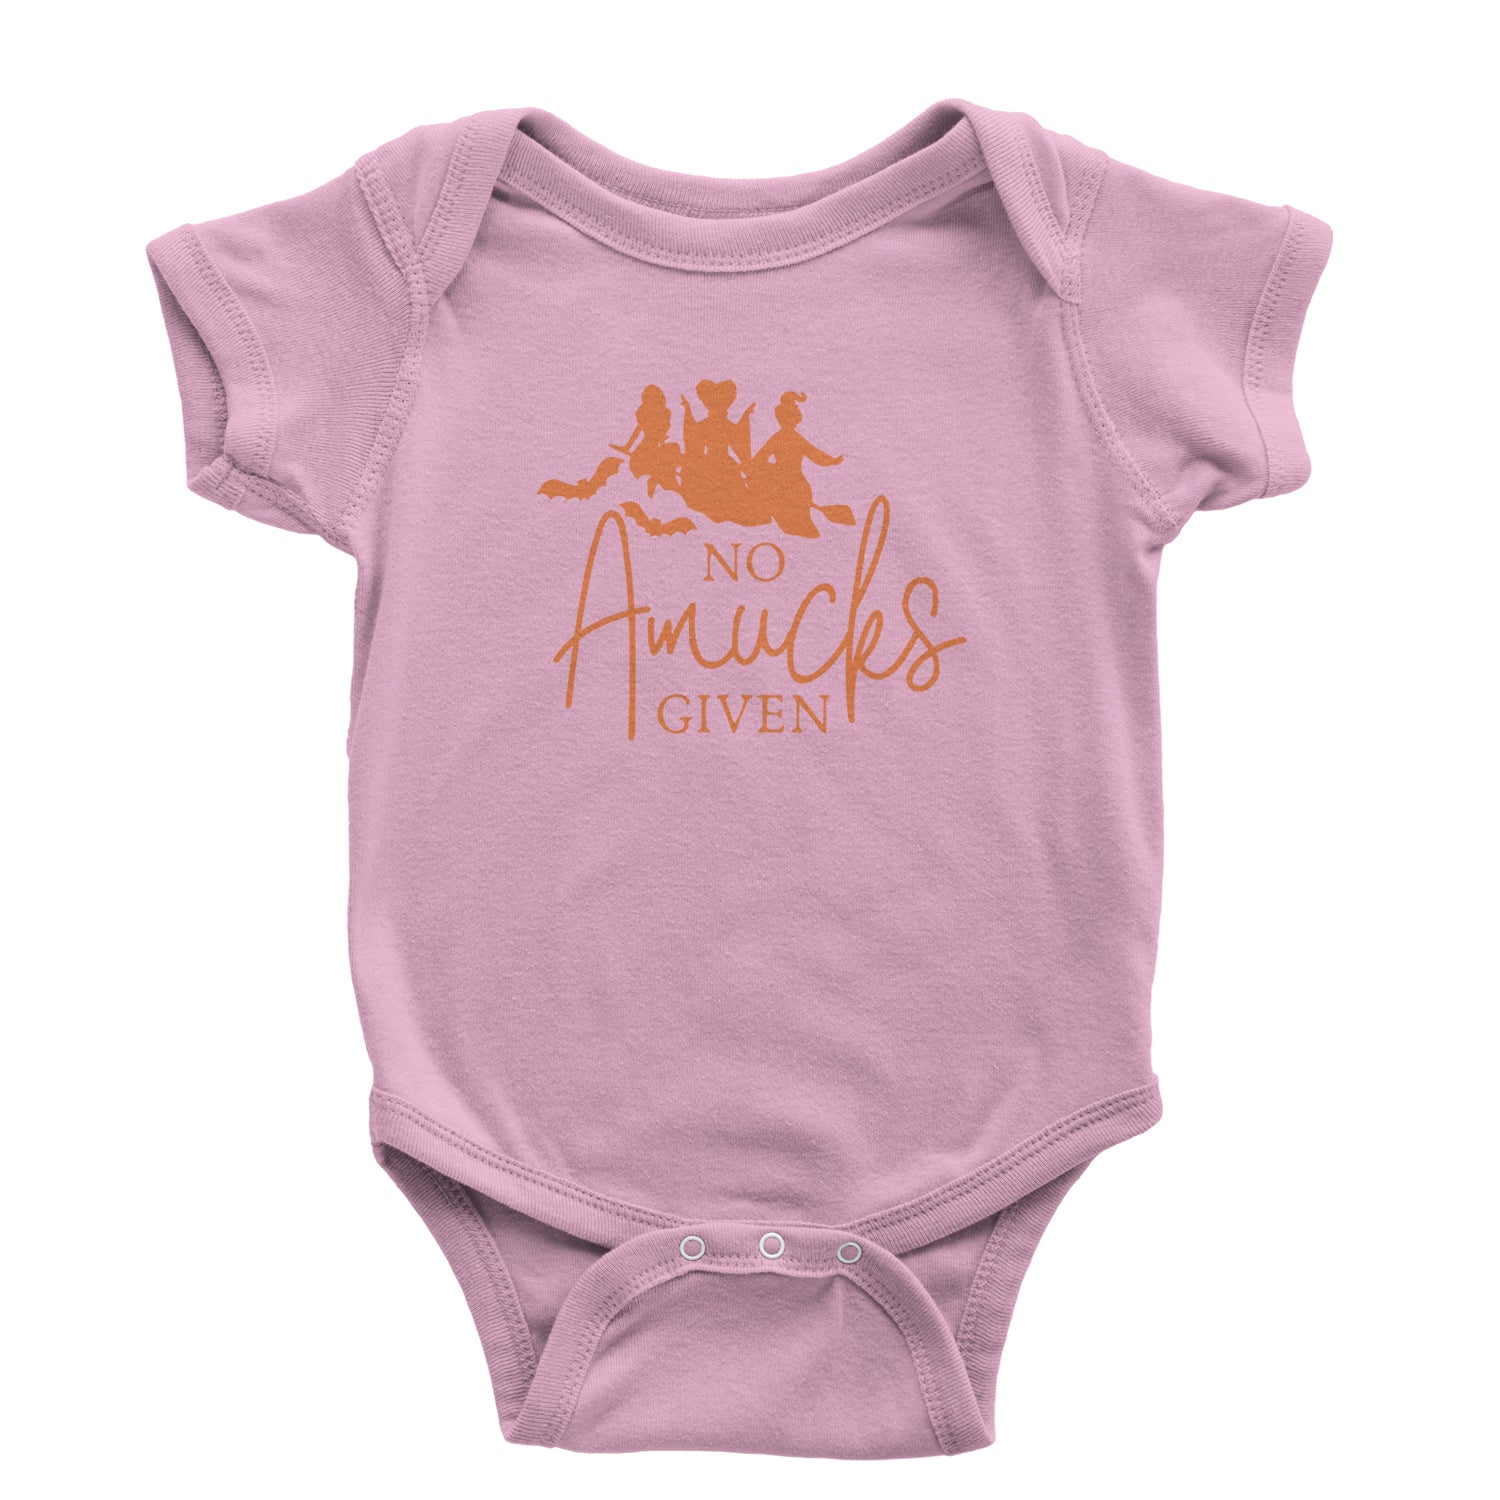 No Amucks Given Hocus Pocus Infant One-Piece Romper Bodysuit and Toddler T-shirt descendants, enchanted, eve, hallows, hocus, or, pocus, sanderson, sisters, treat, trick, witches by Expression Tees